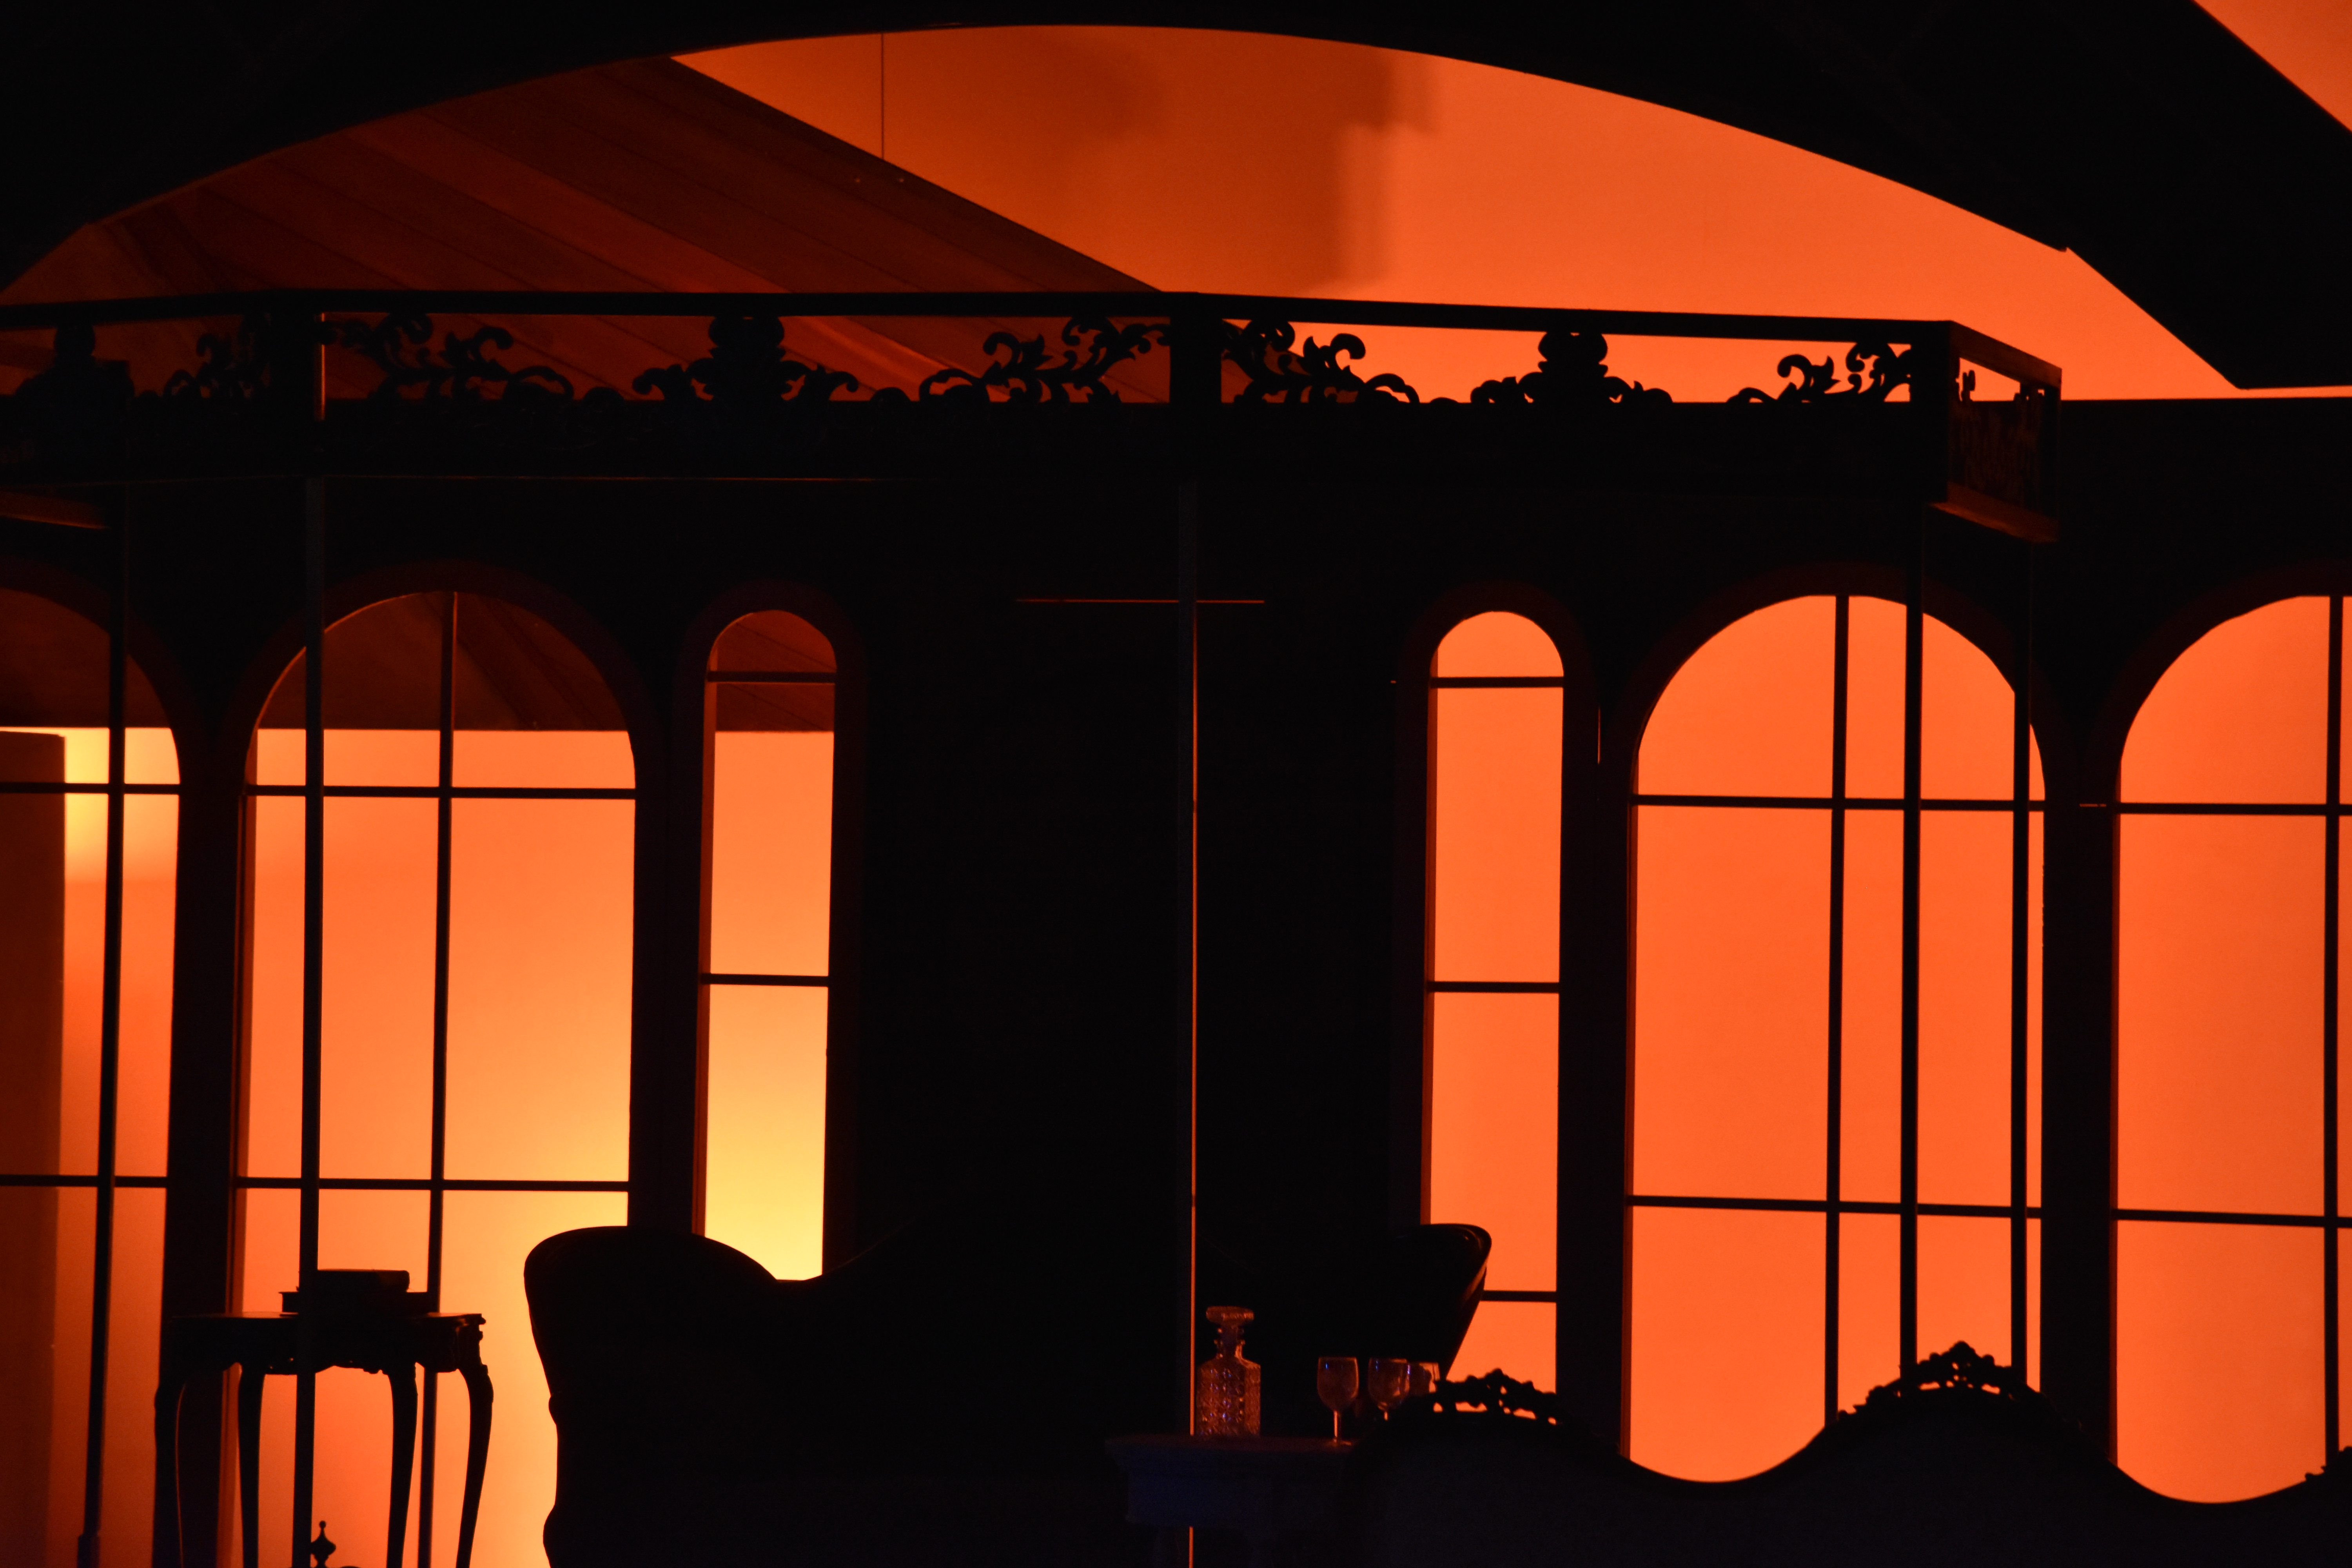 The setting of the first scene brings an orange glow that embraces the whole room.